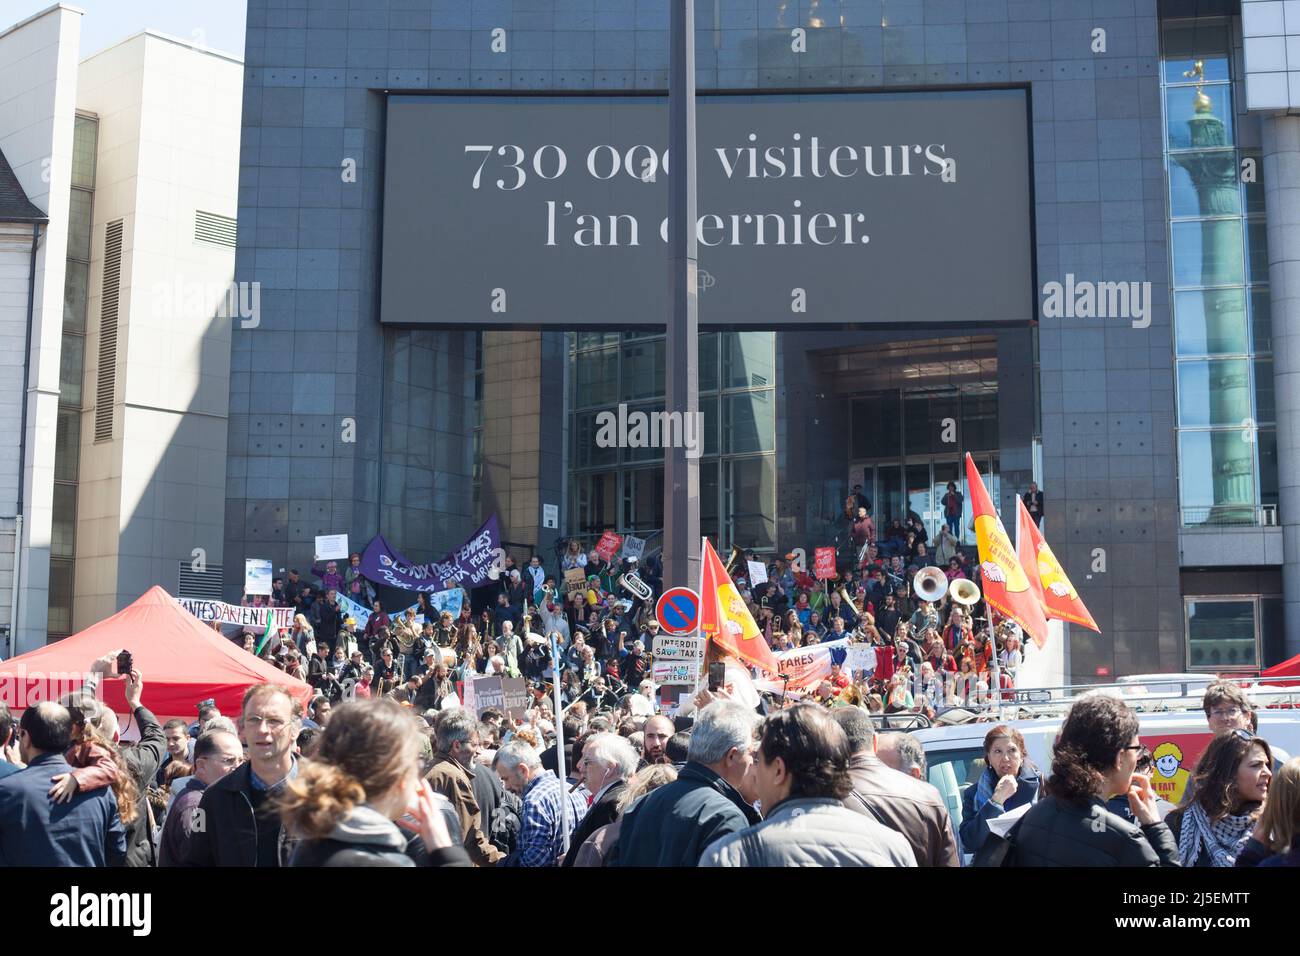 Annual demonstration in sunny Paris for workers rights on May 1rst with the digital poster : '730000 visiteurs l'année dernière' Stock Photo